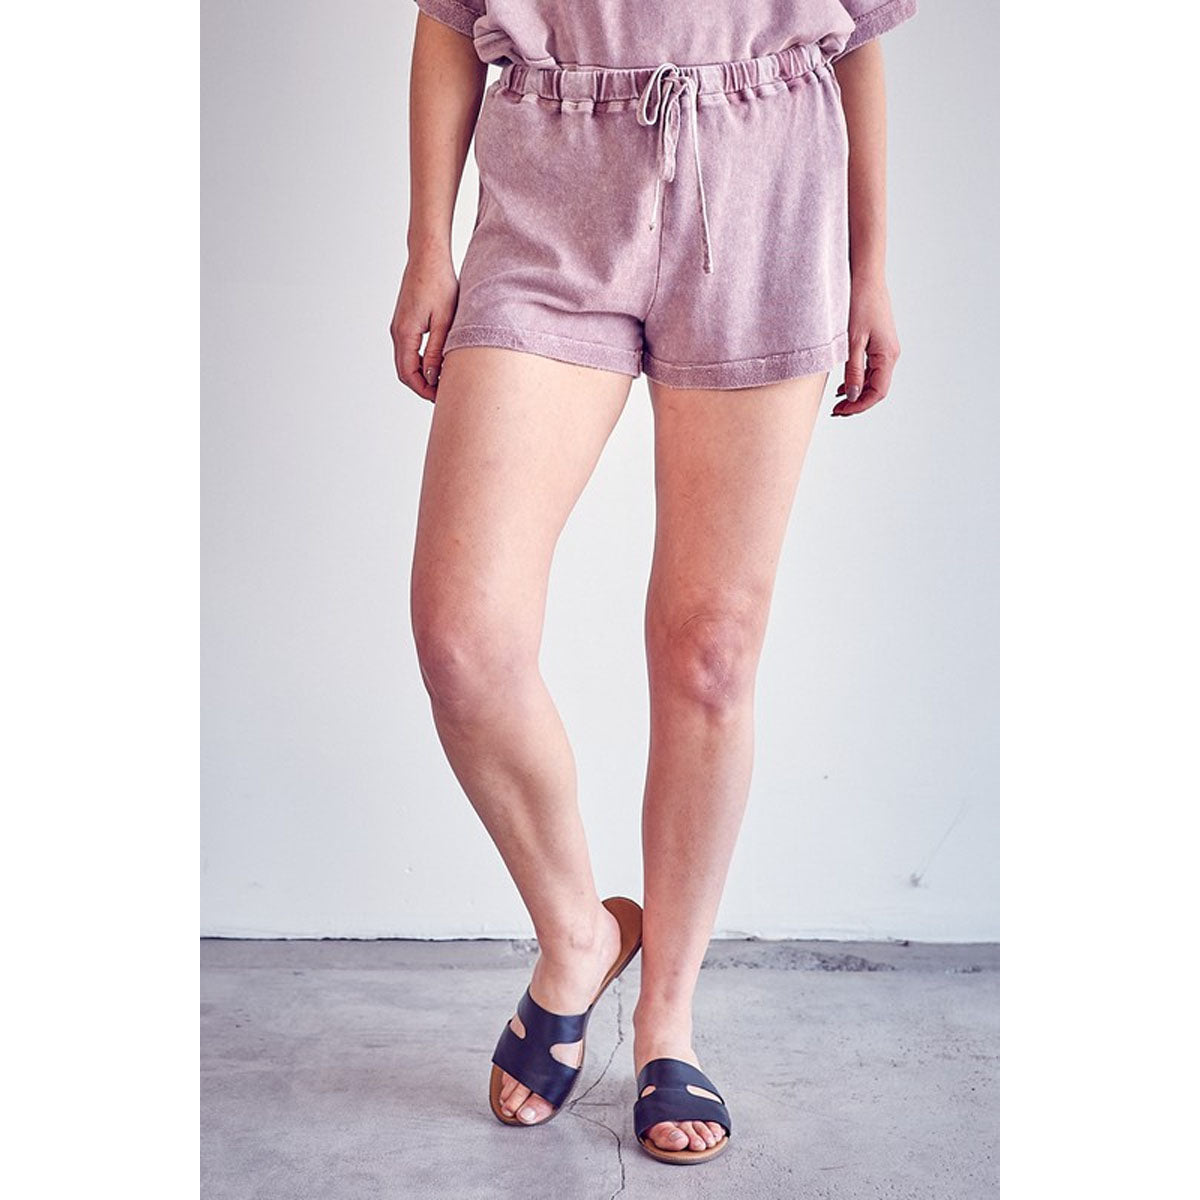 Stone Washed Shorts - Dusty Mauve - Southern Grace Creations